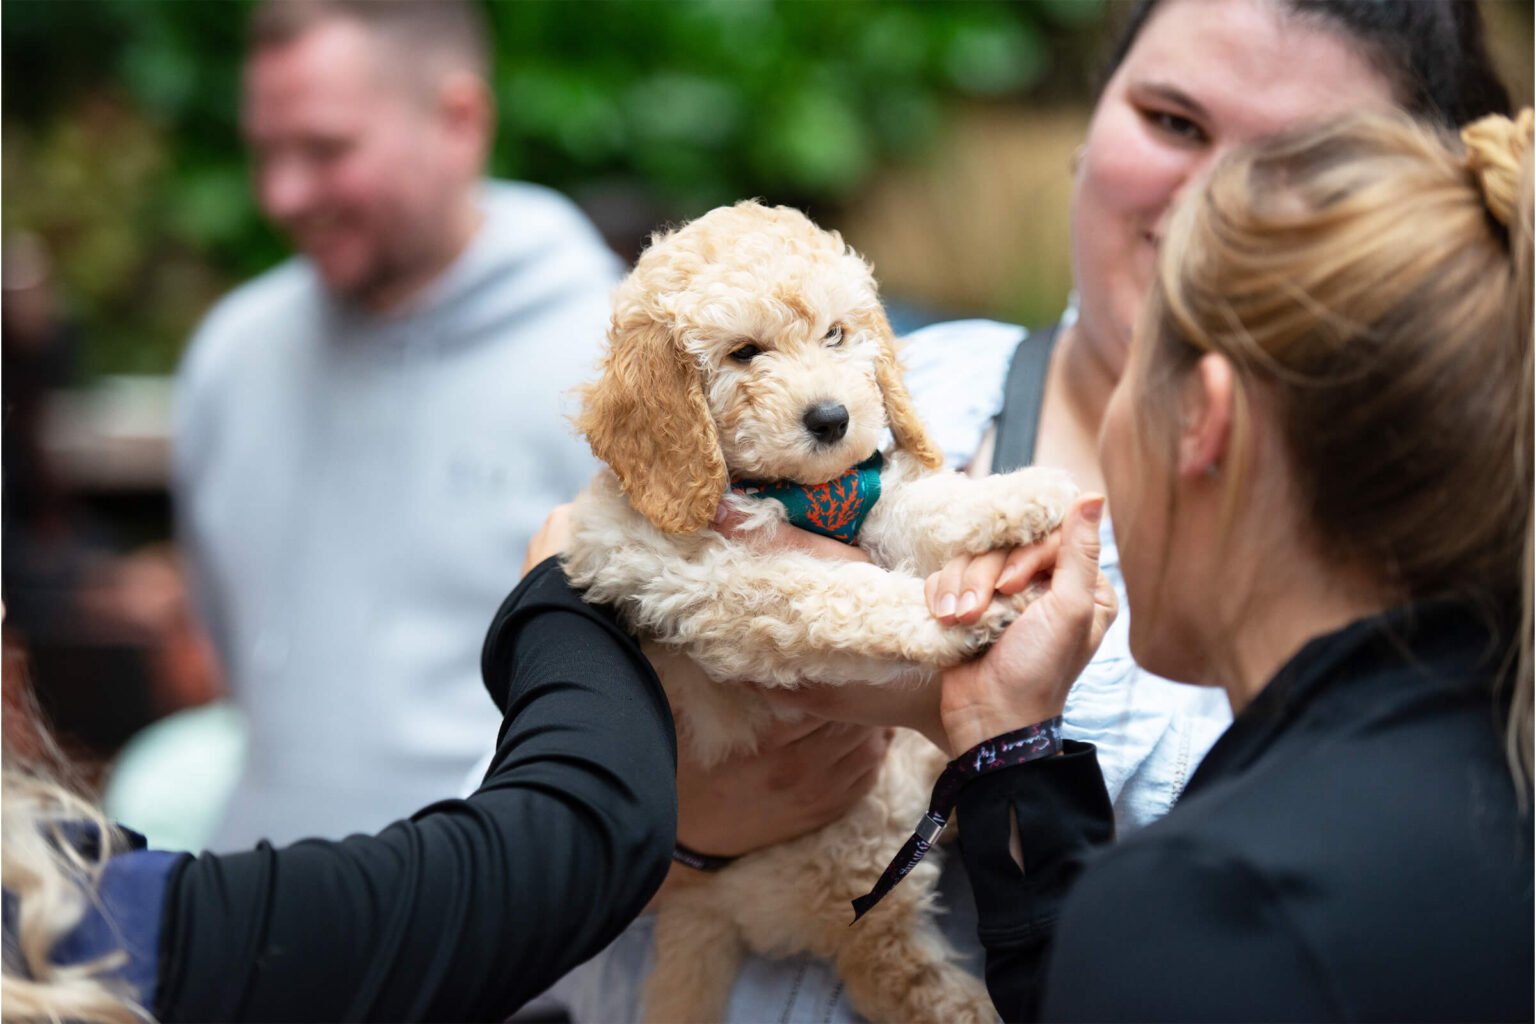 Group of people petting a small puppy